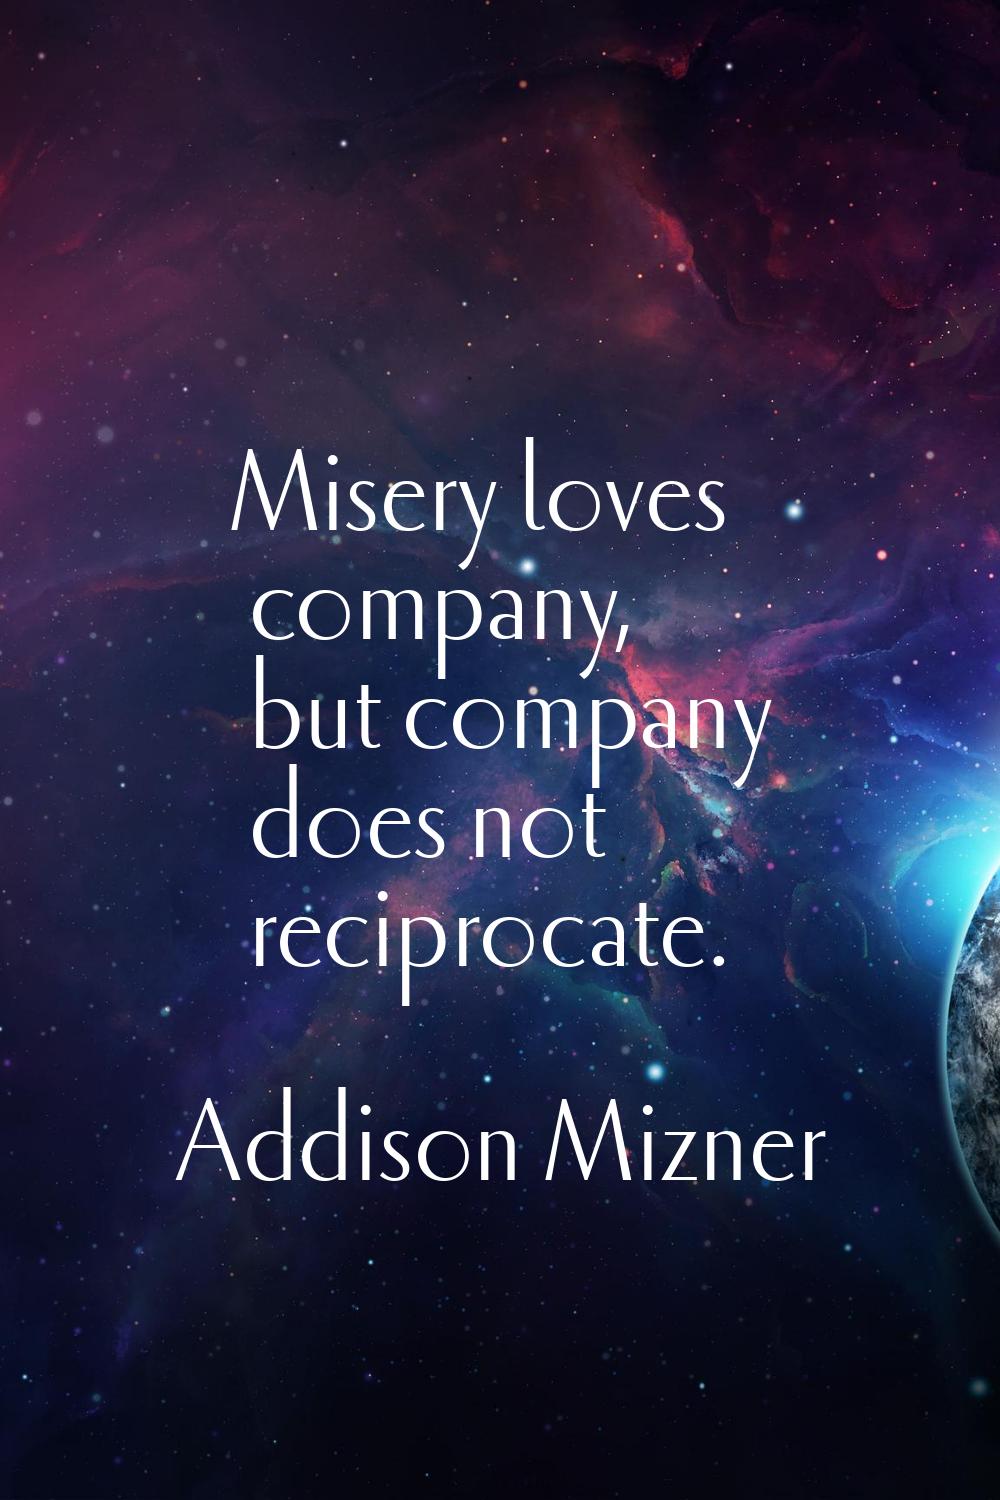 Misery loves company, but company does not reciprocate.